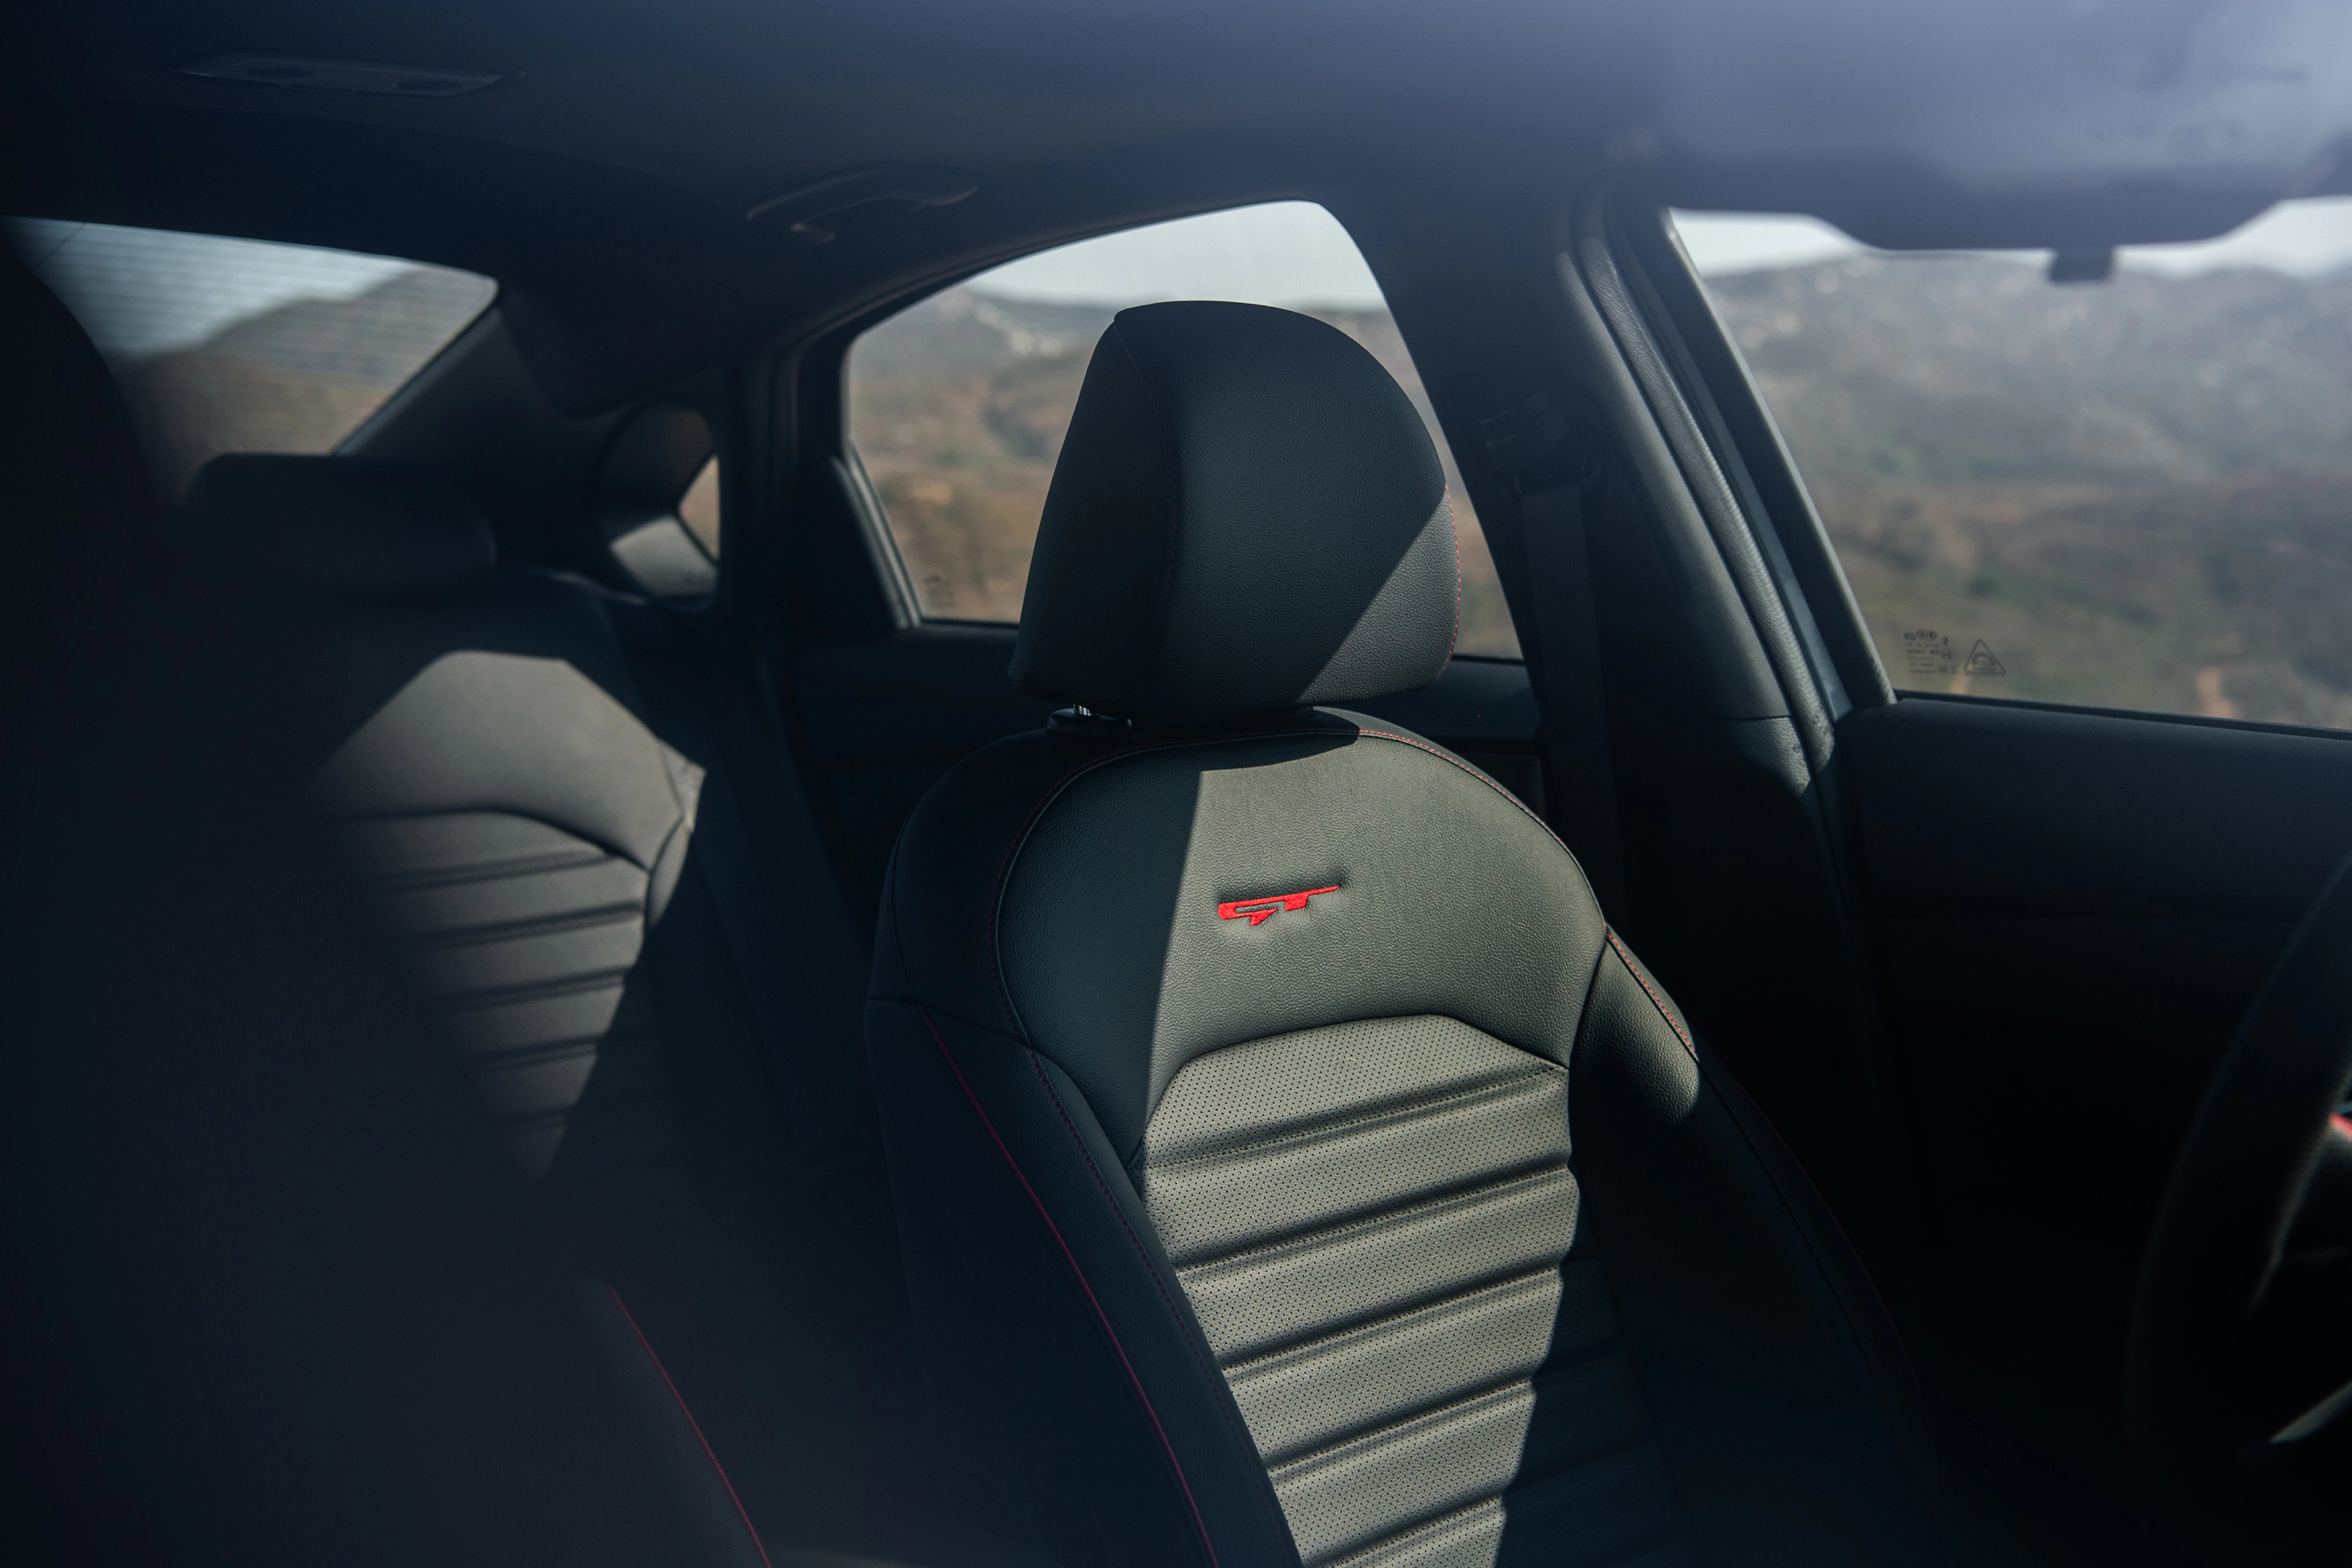 2022 Kia Forte available 10-way power-adjustable driver’s seat